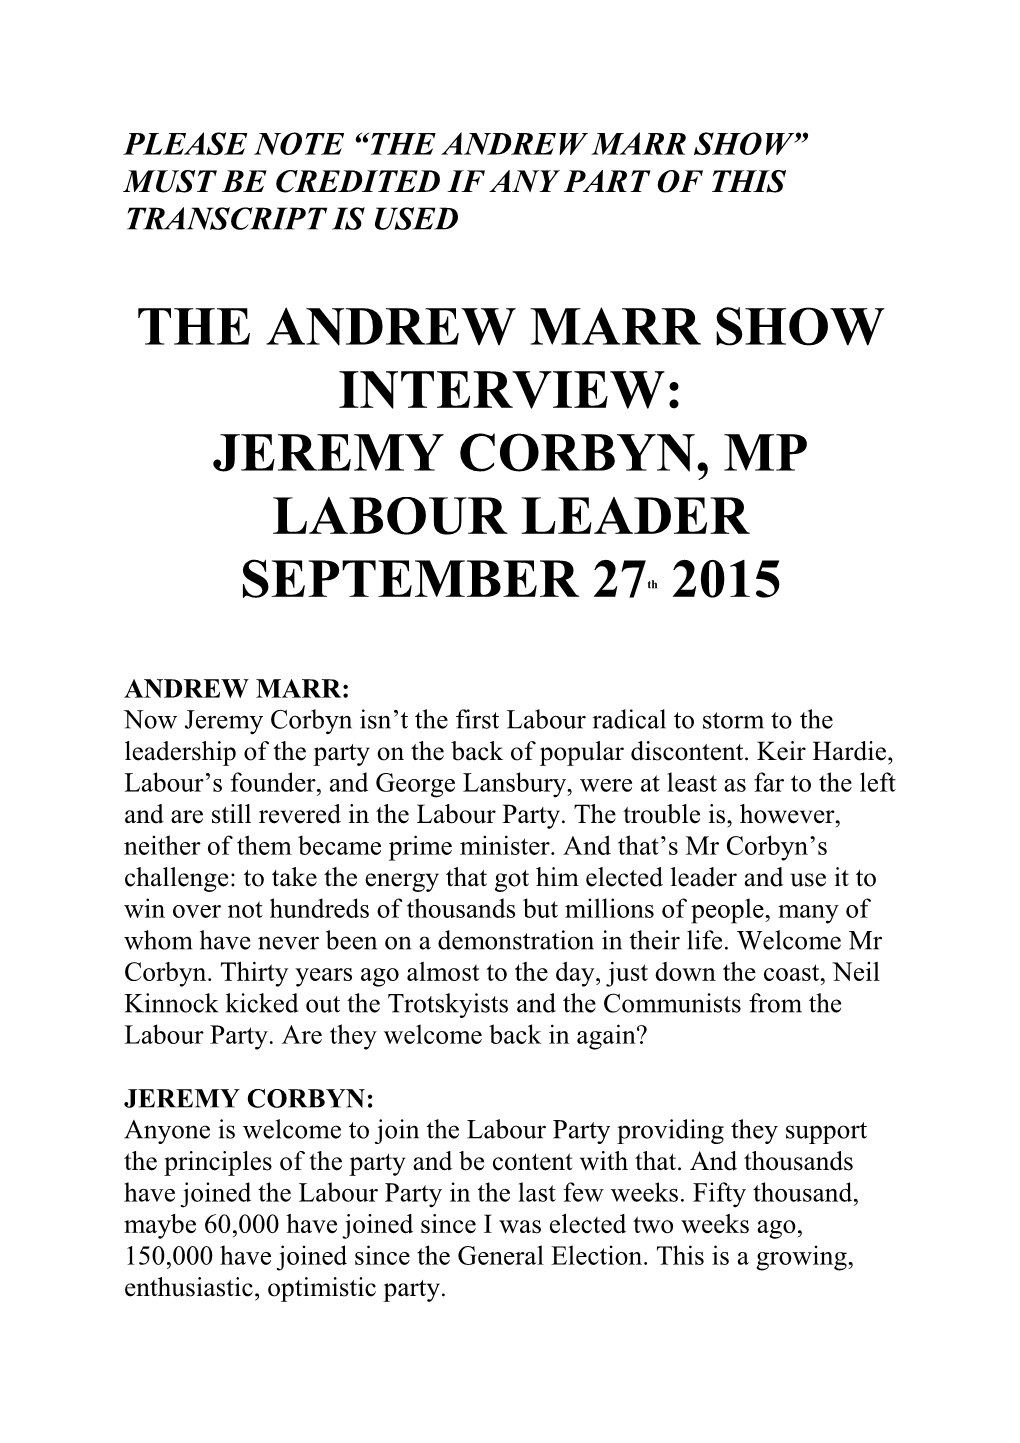 The Andrew Marr Show Interview: Jeremy Corbyn, Mp Labour Leader